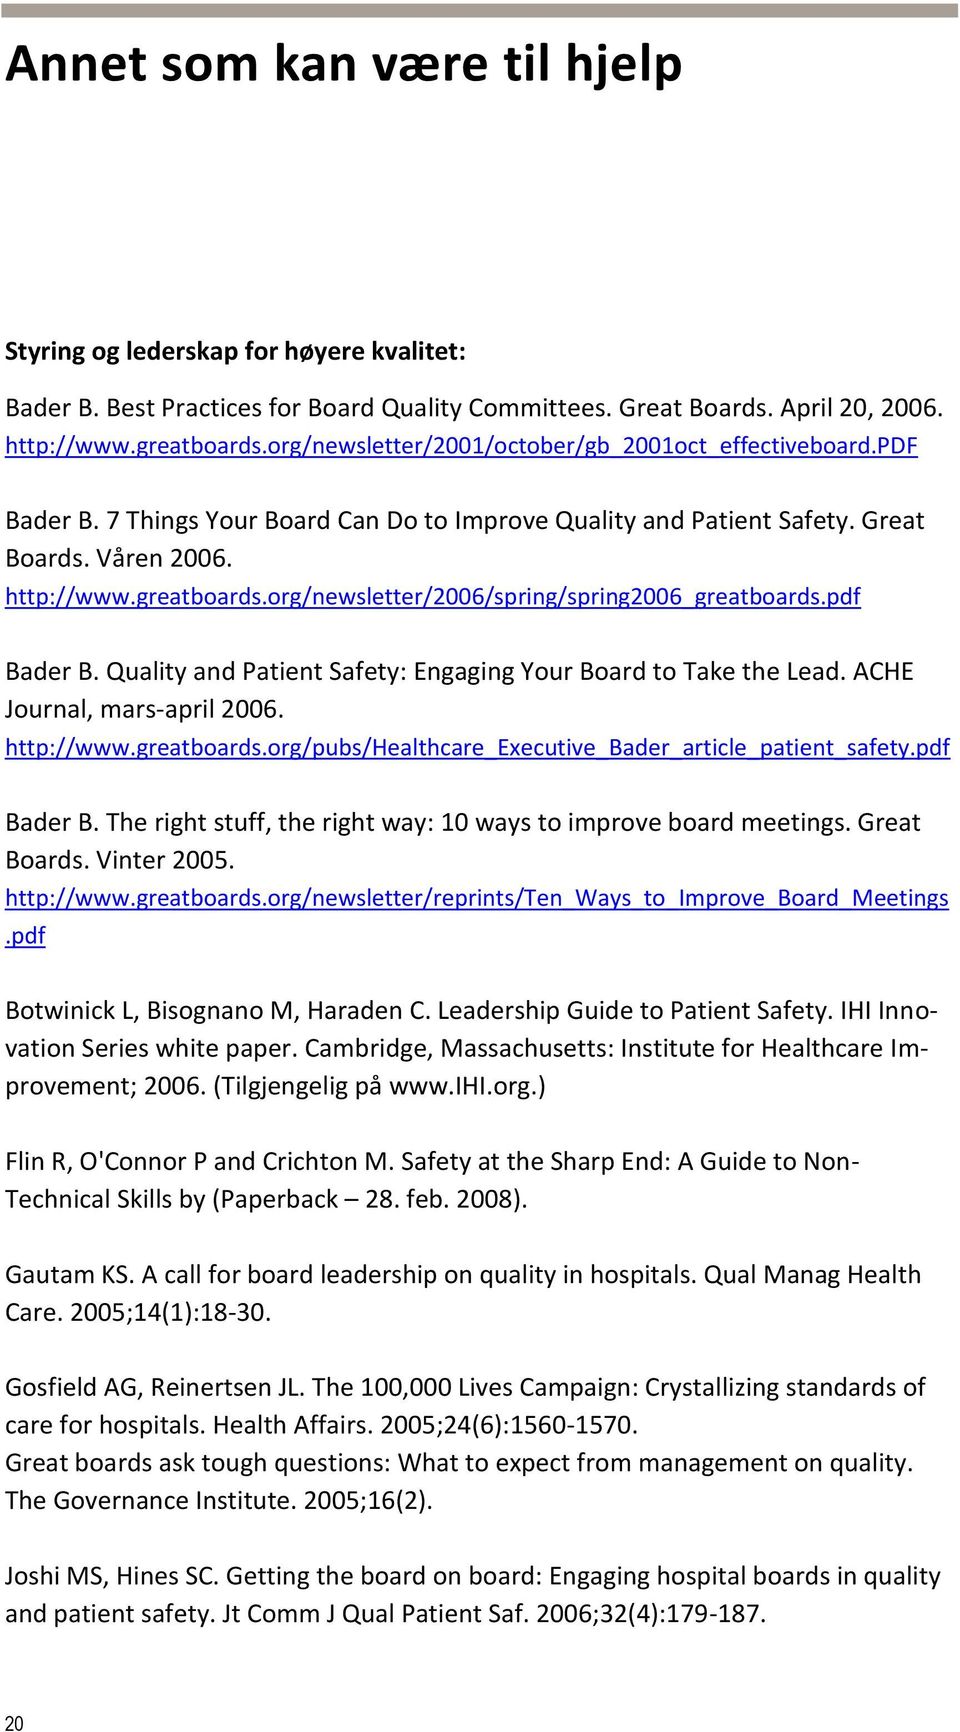 org/newsletter/2006/spring/spring2006_greatboards.pdf Bader B. Quality and Patient Safety: Engaging Your Board to Take the Lead. ACHE Journal, mars-april 2006. http://www.greatboards.org/pubs/healthcare_executive_bader_article_patient_safety.